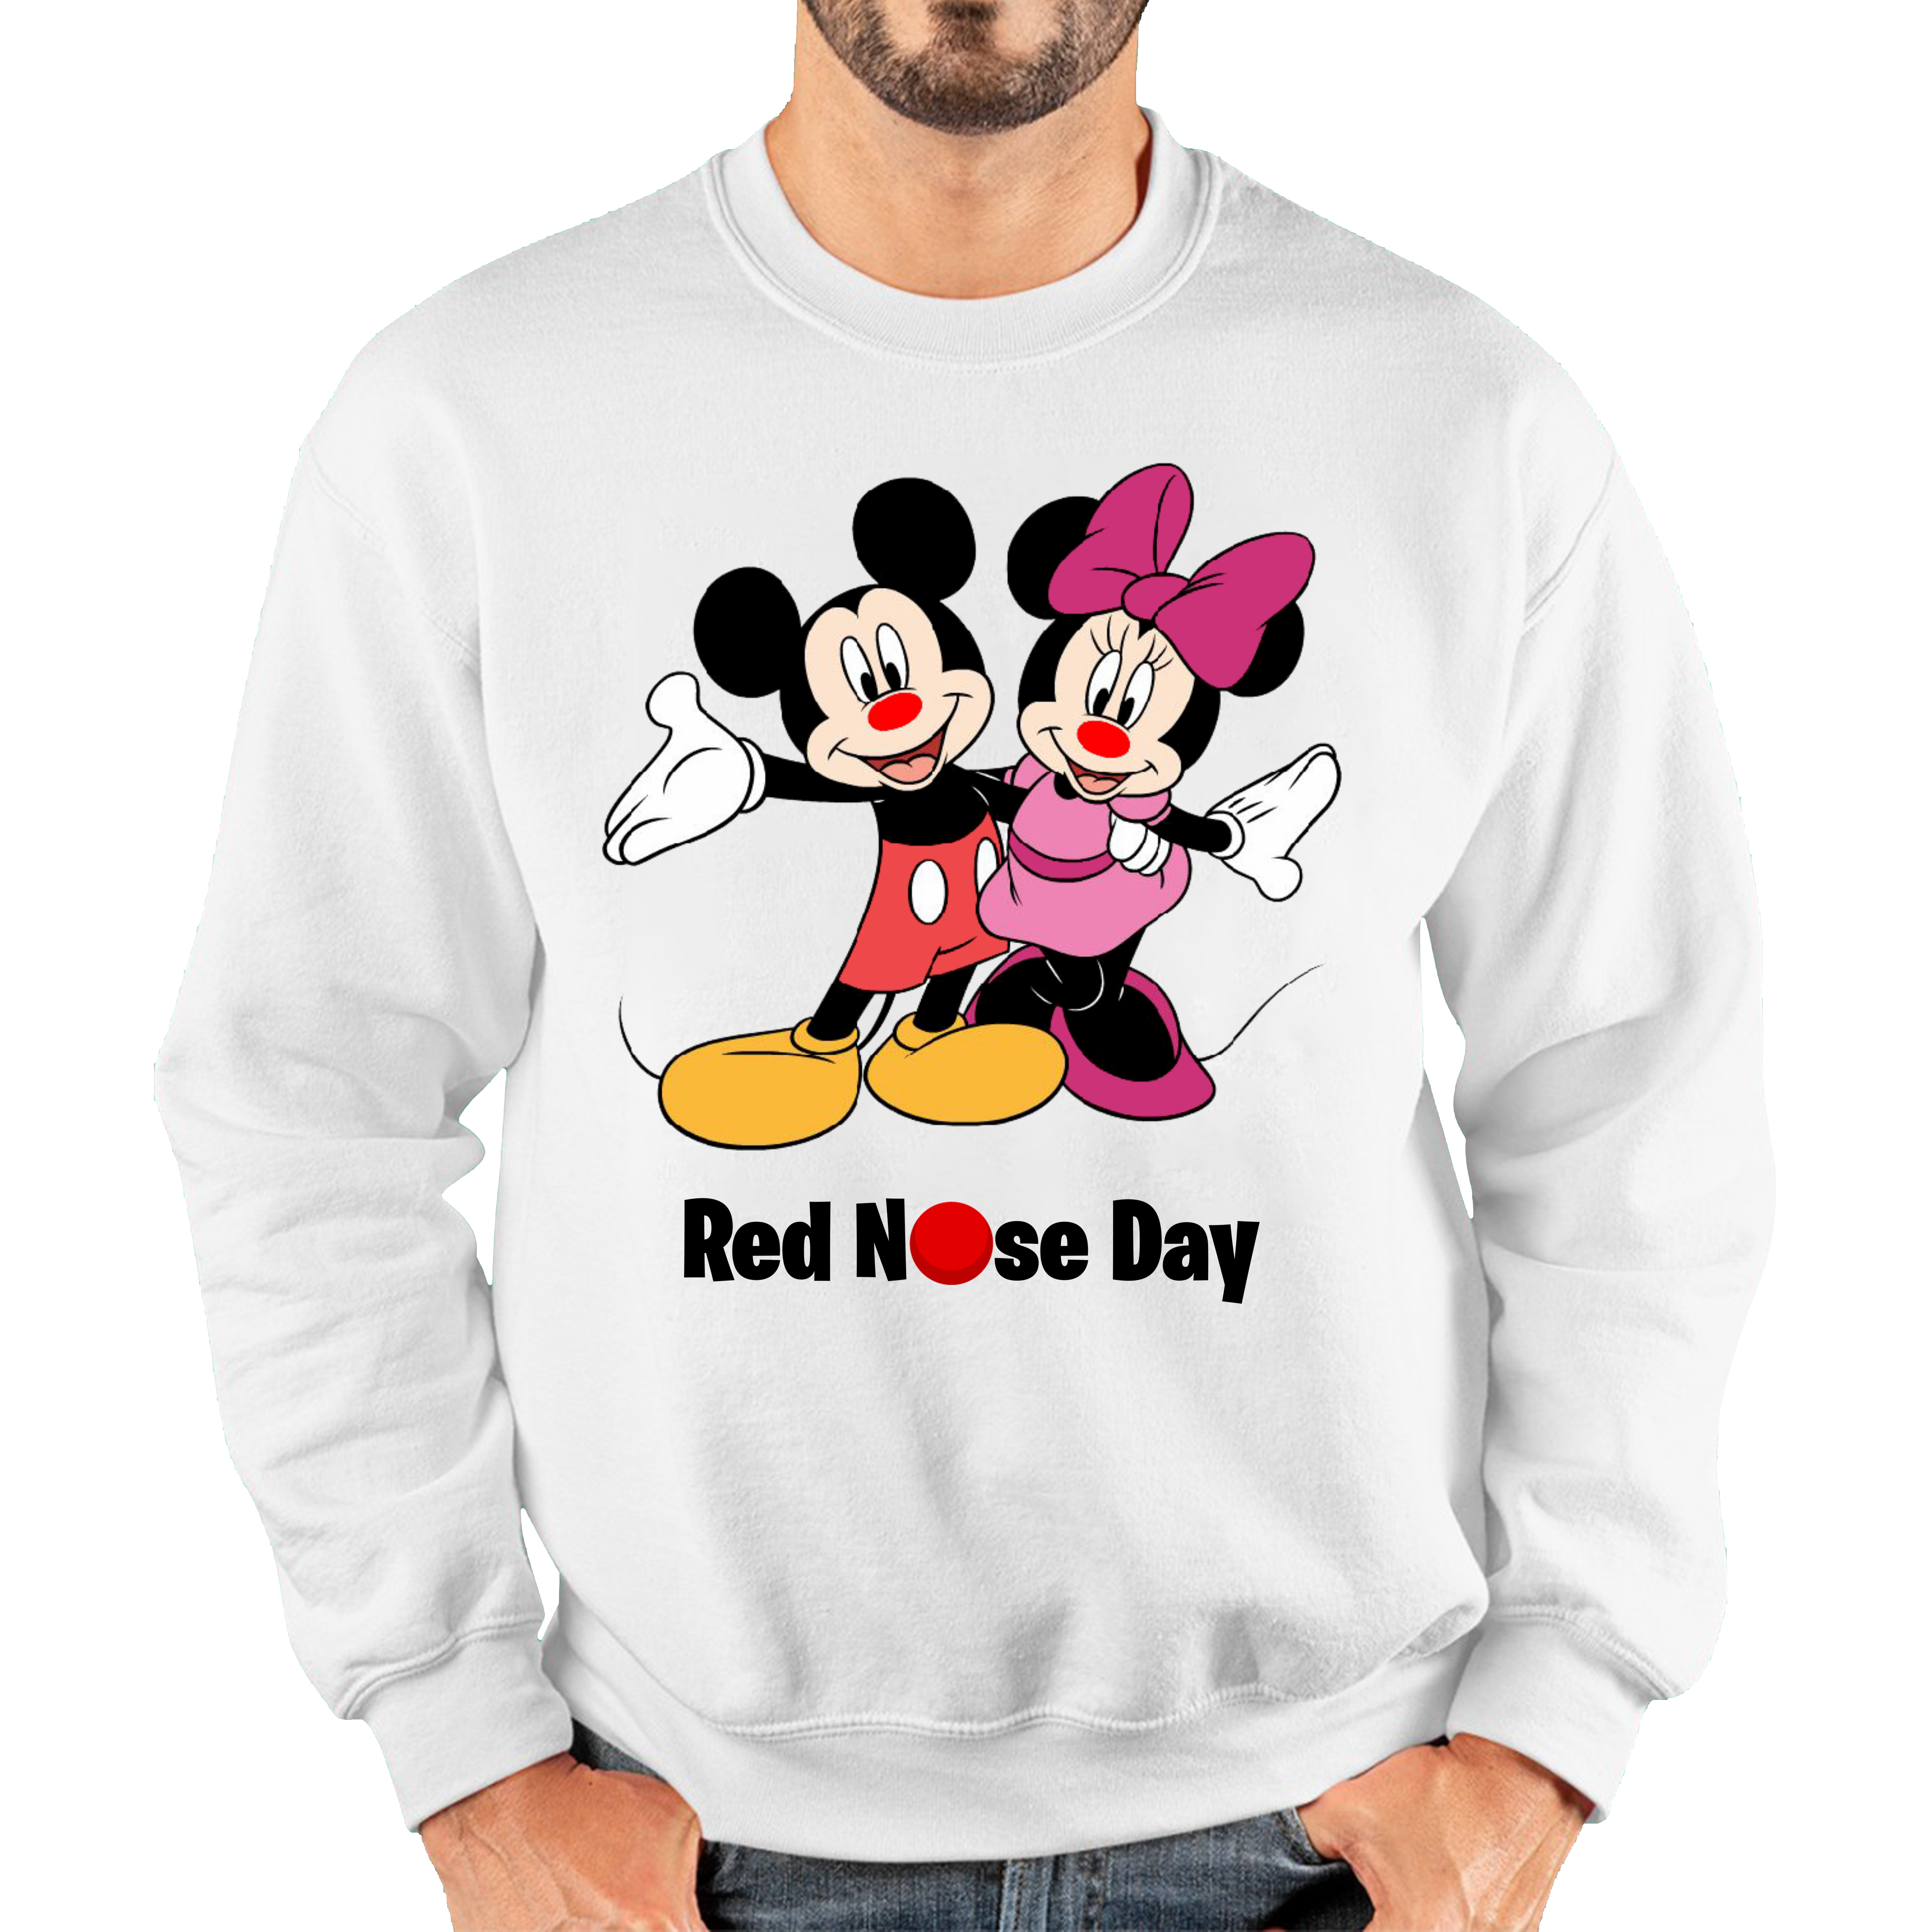 Mickey And Minnie Mouse Red Nose Day Adult Sweatshirt. 50% Goes To Charity